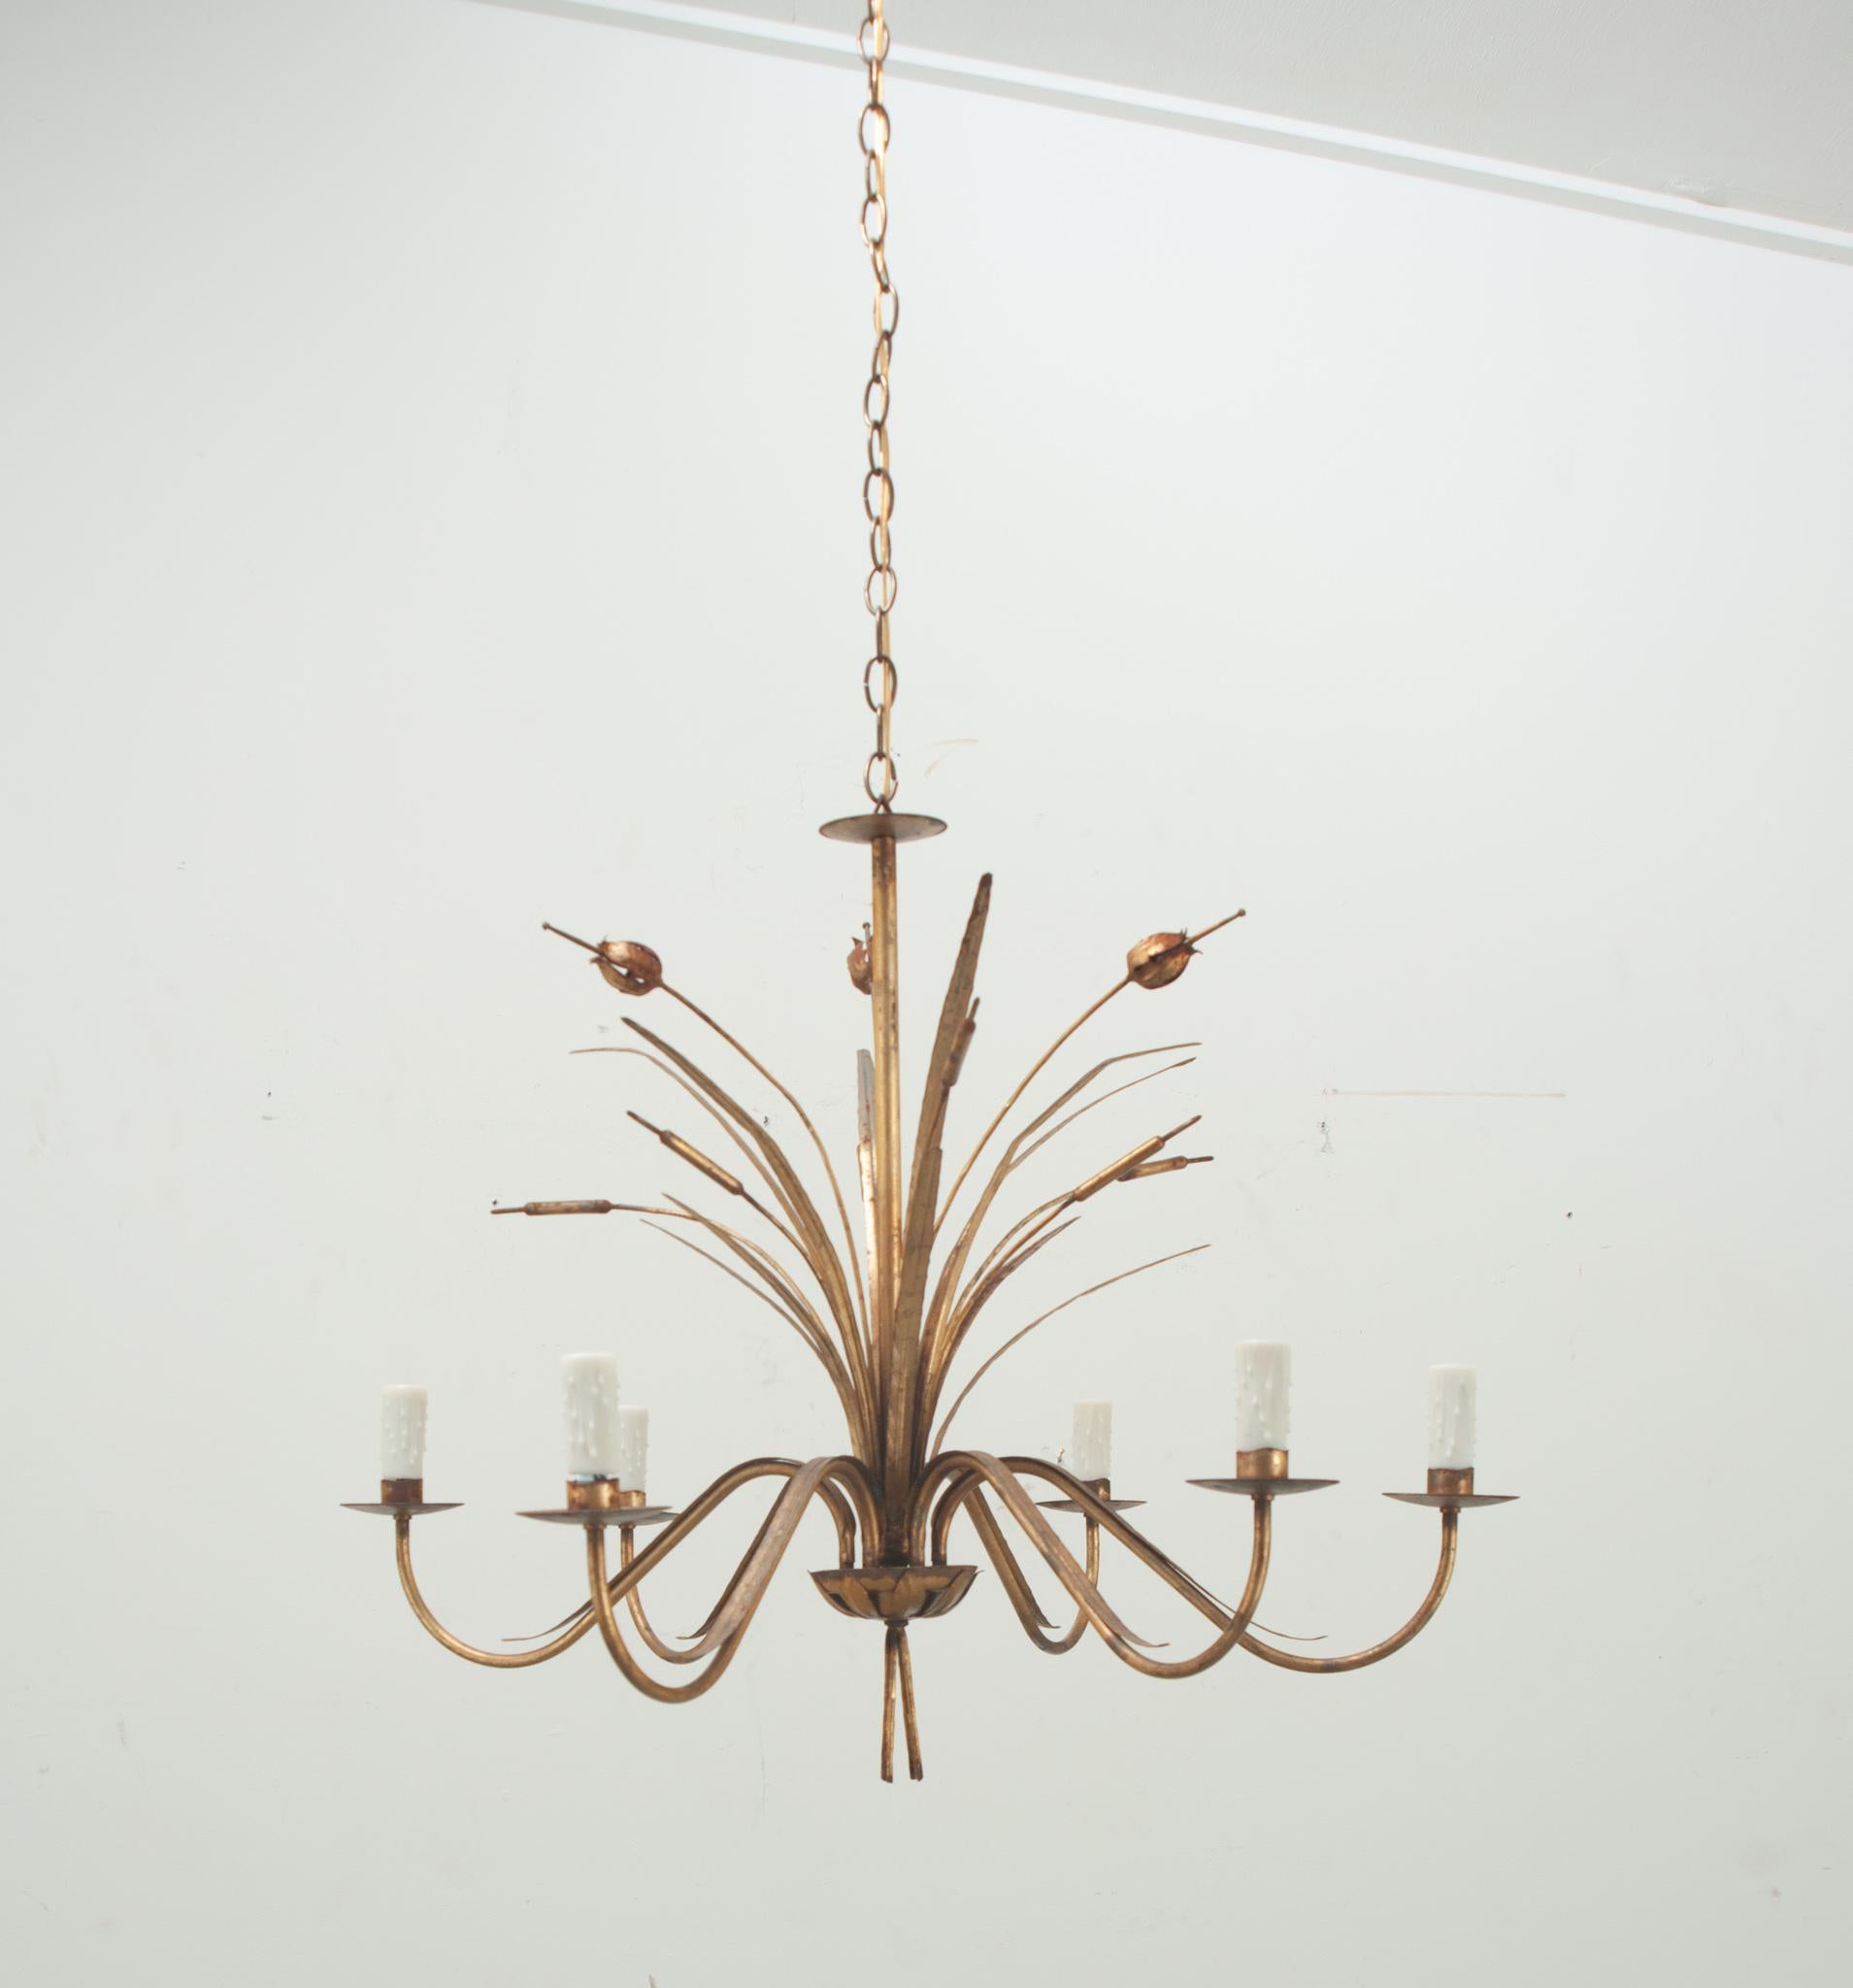 A playful vintage six light brass chandelier. The center of the fixture depicts long grasses and cattails and has six curving arms with faux candle covers. This chandelier has been cleaned and wired for US electrical using UL listed parts and is